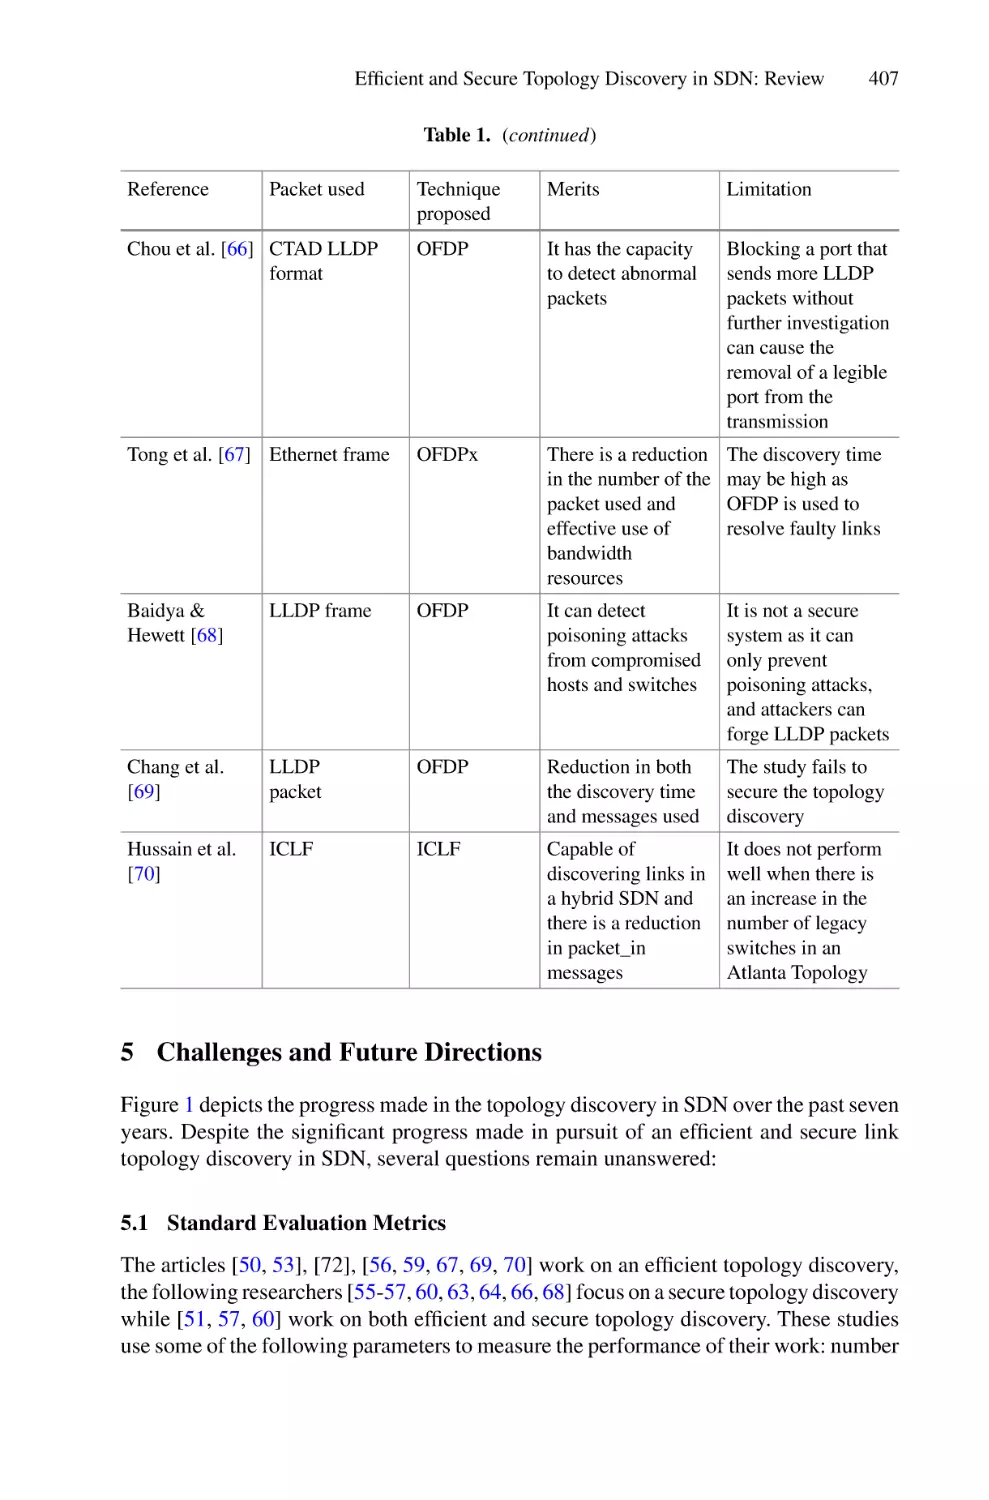 5 Challenges and Future Directions
5.1 Standard Evaluation Metrics